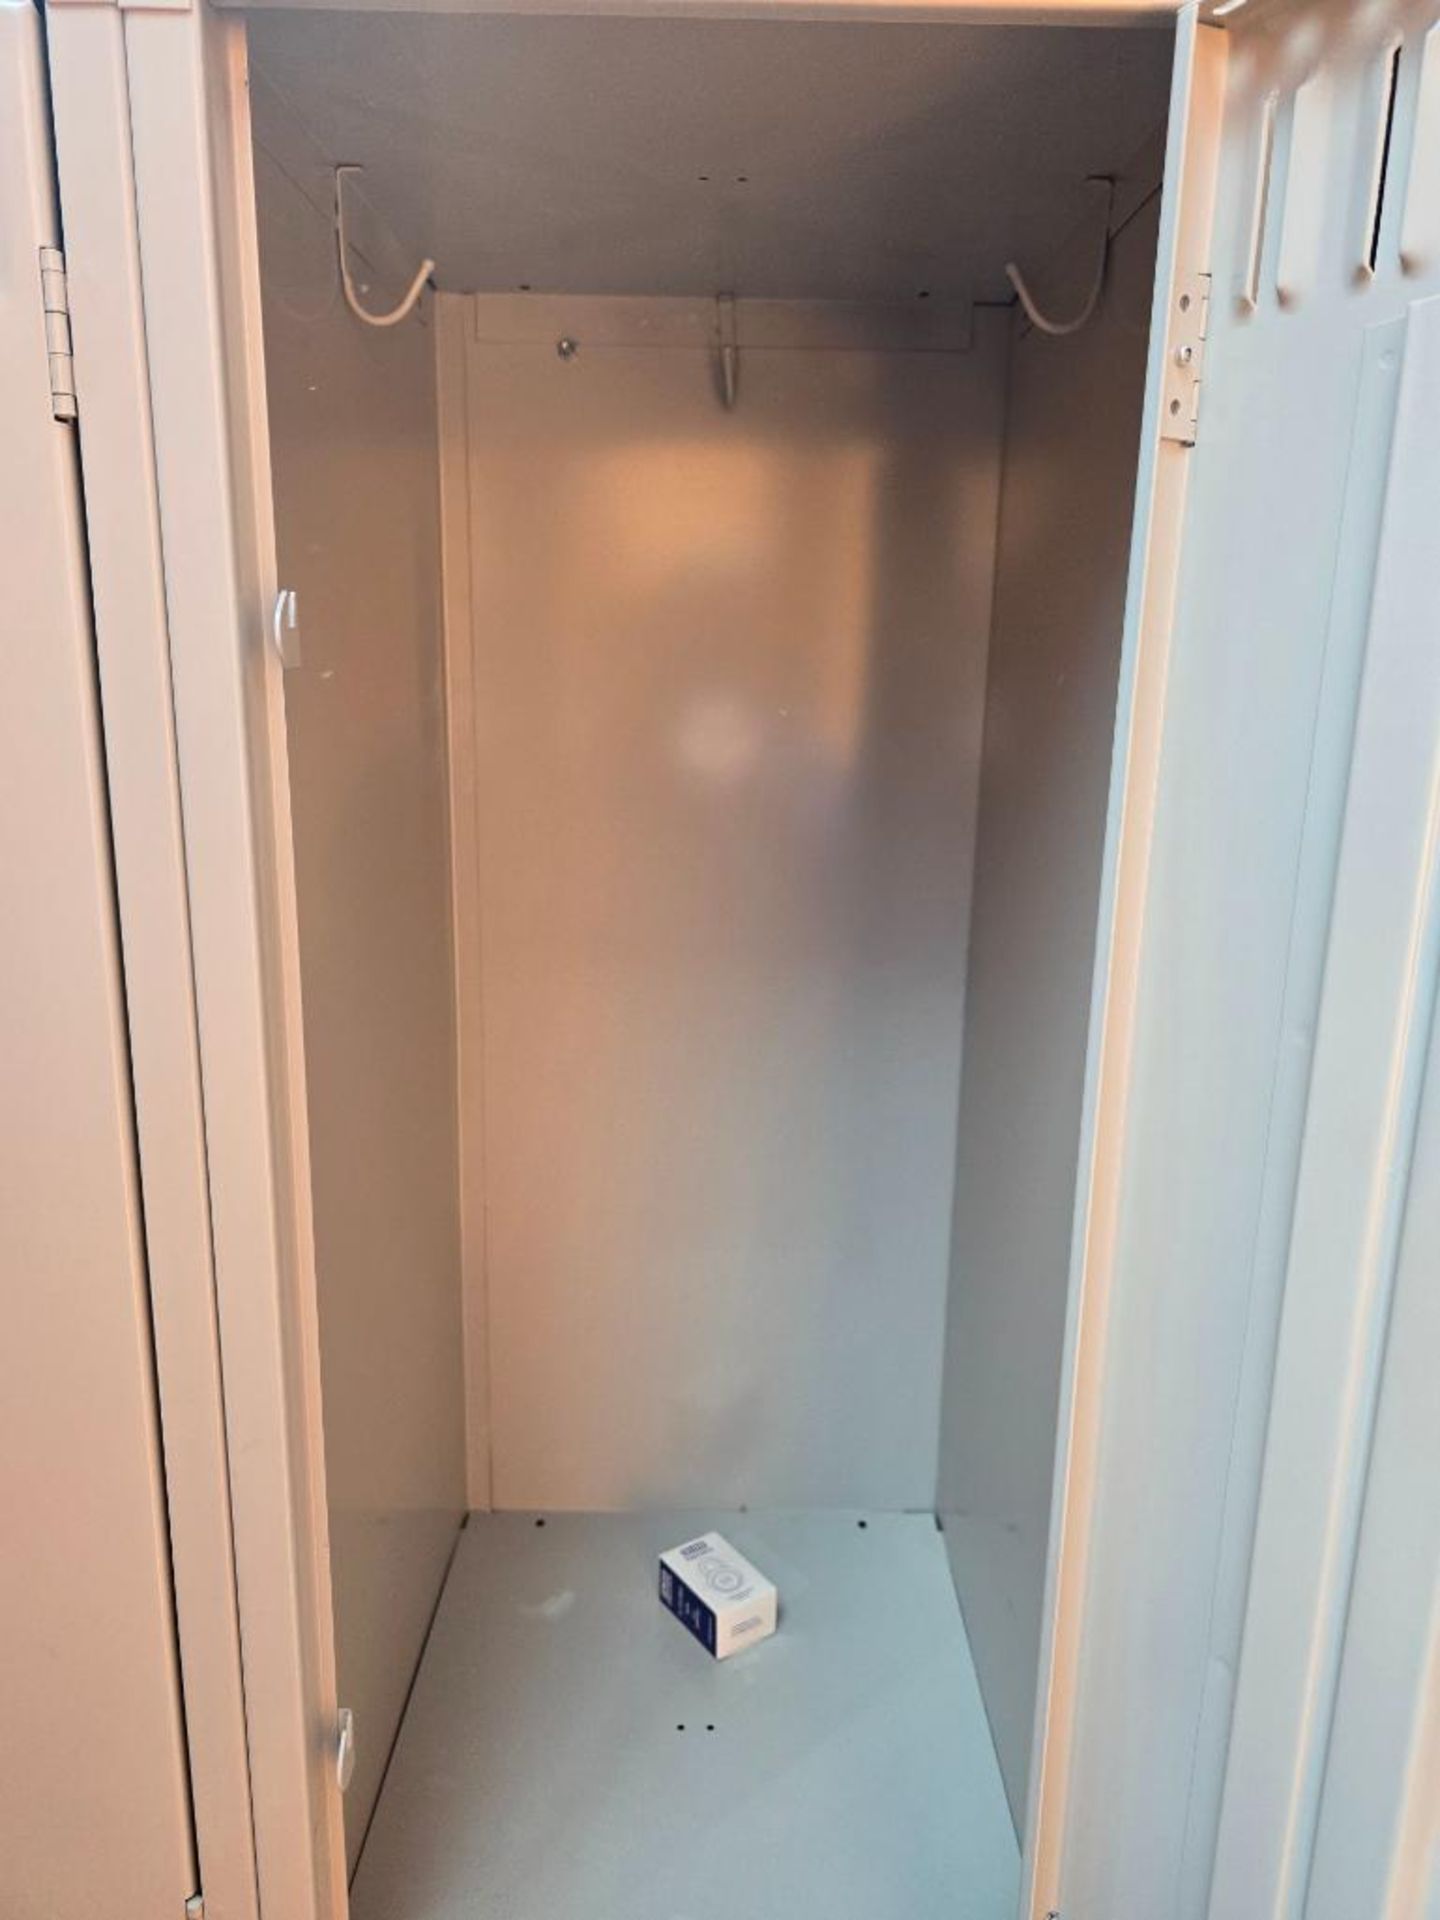 (24) Bank Tennsco Employee Locker System ($100 Loading Fee Will Be Added To Buyer's Invoice) - Image 5 of 5